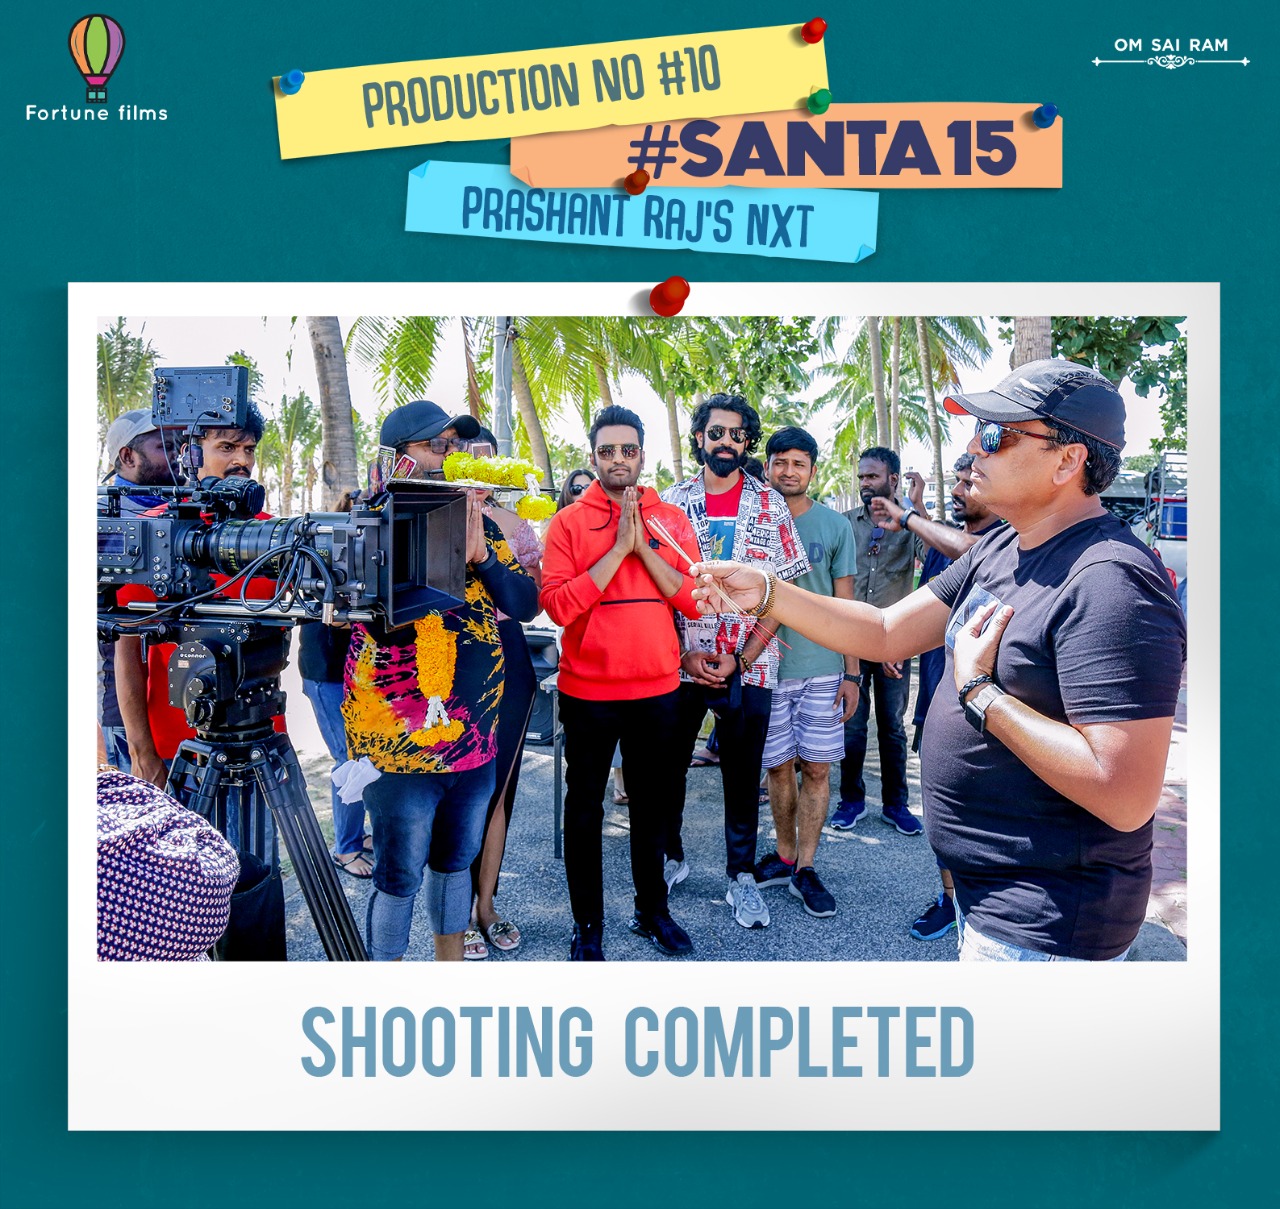 The Shooting of Santhanam Santa15 wrapped up.